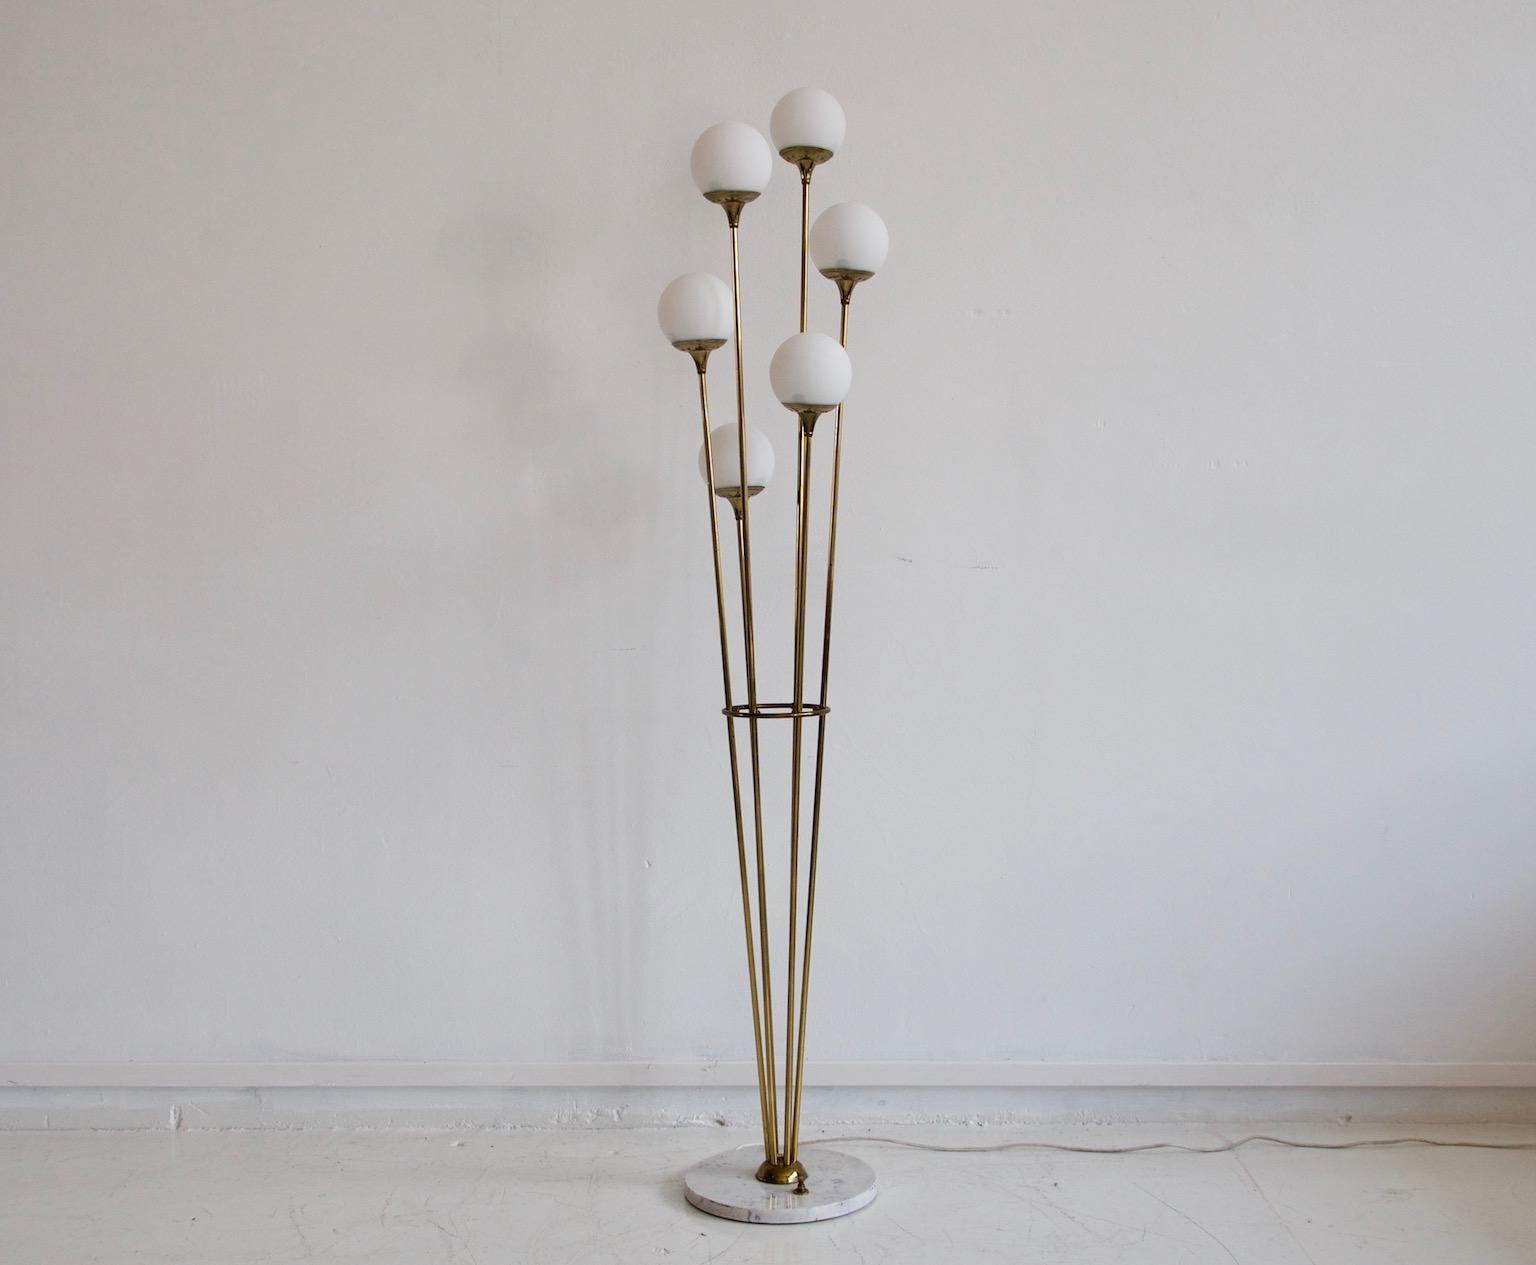 Mid-20th century Italian brass floor lamp in the style of Stilnovo with six sateen white glass shades and marble stand. The lights can be switched on as two, four or six at a time. Please note that the switch is not on the marble base of the lamp as